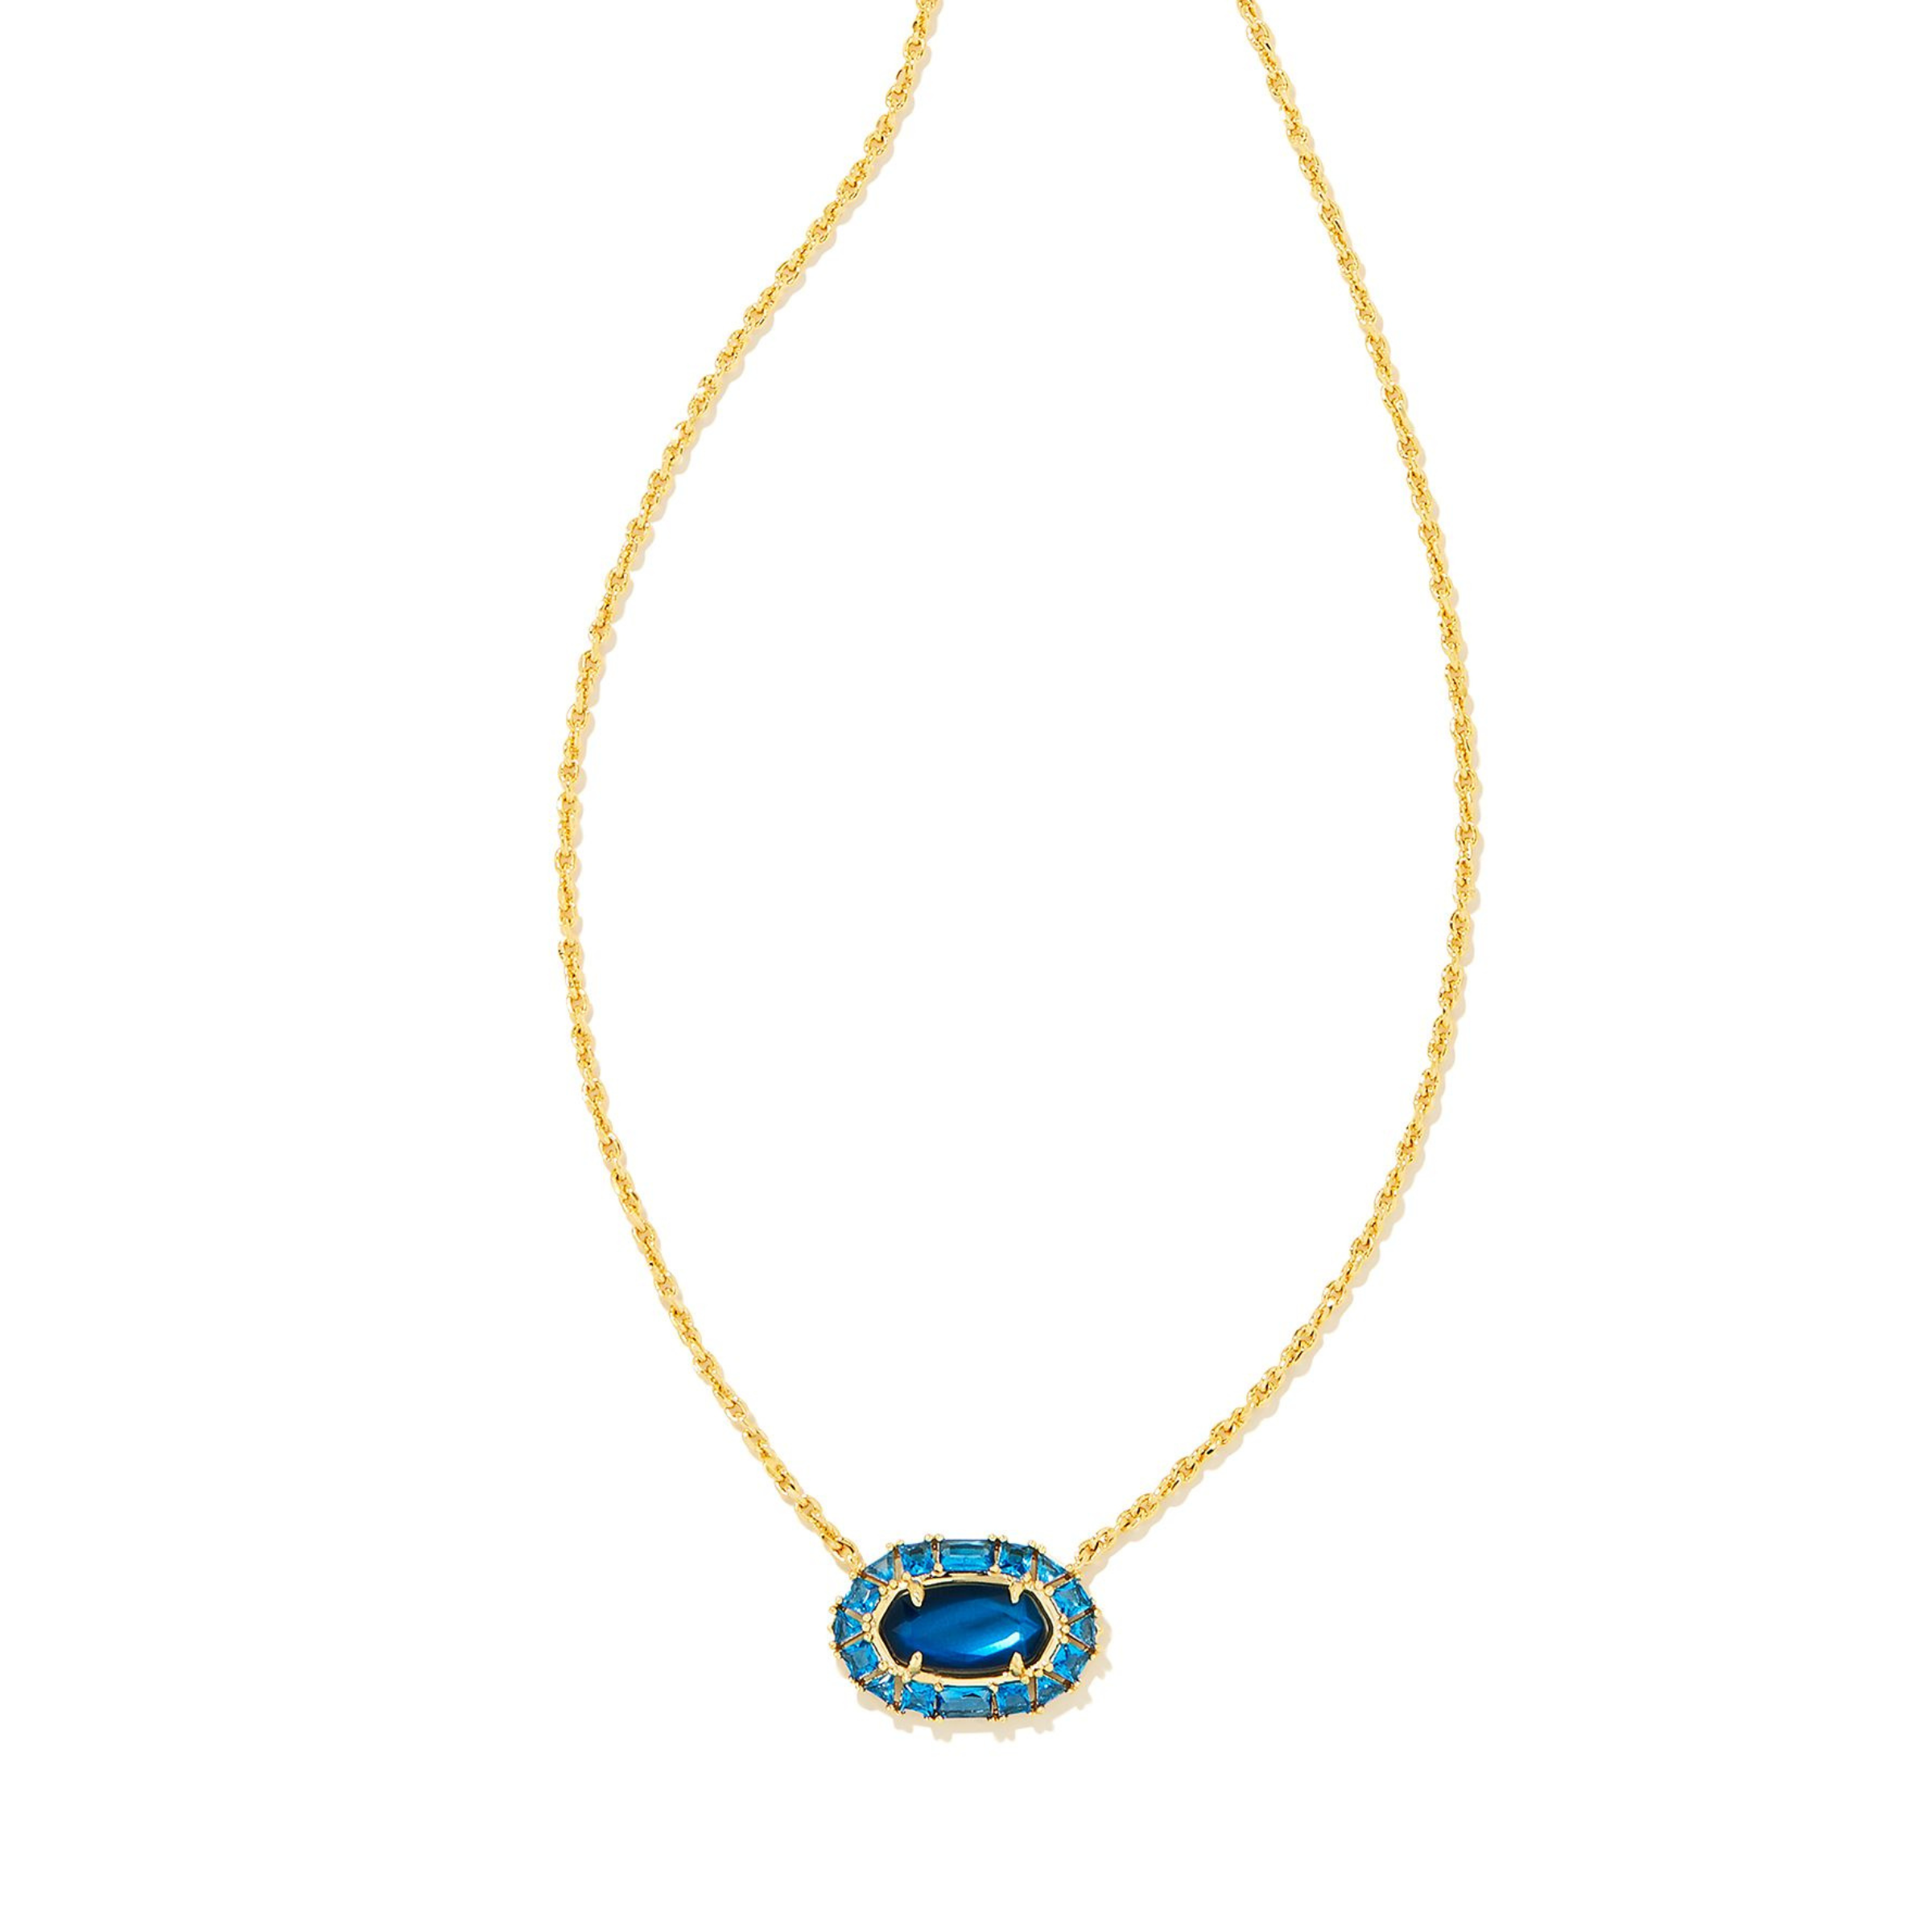 Gold chain necklace with a crystal and sea blue illusion oval pendant pictured on a white background. 